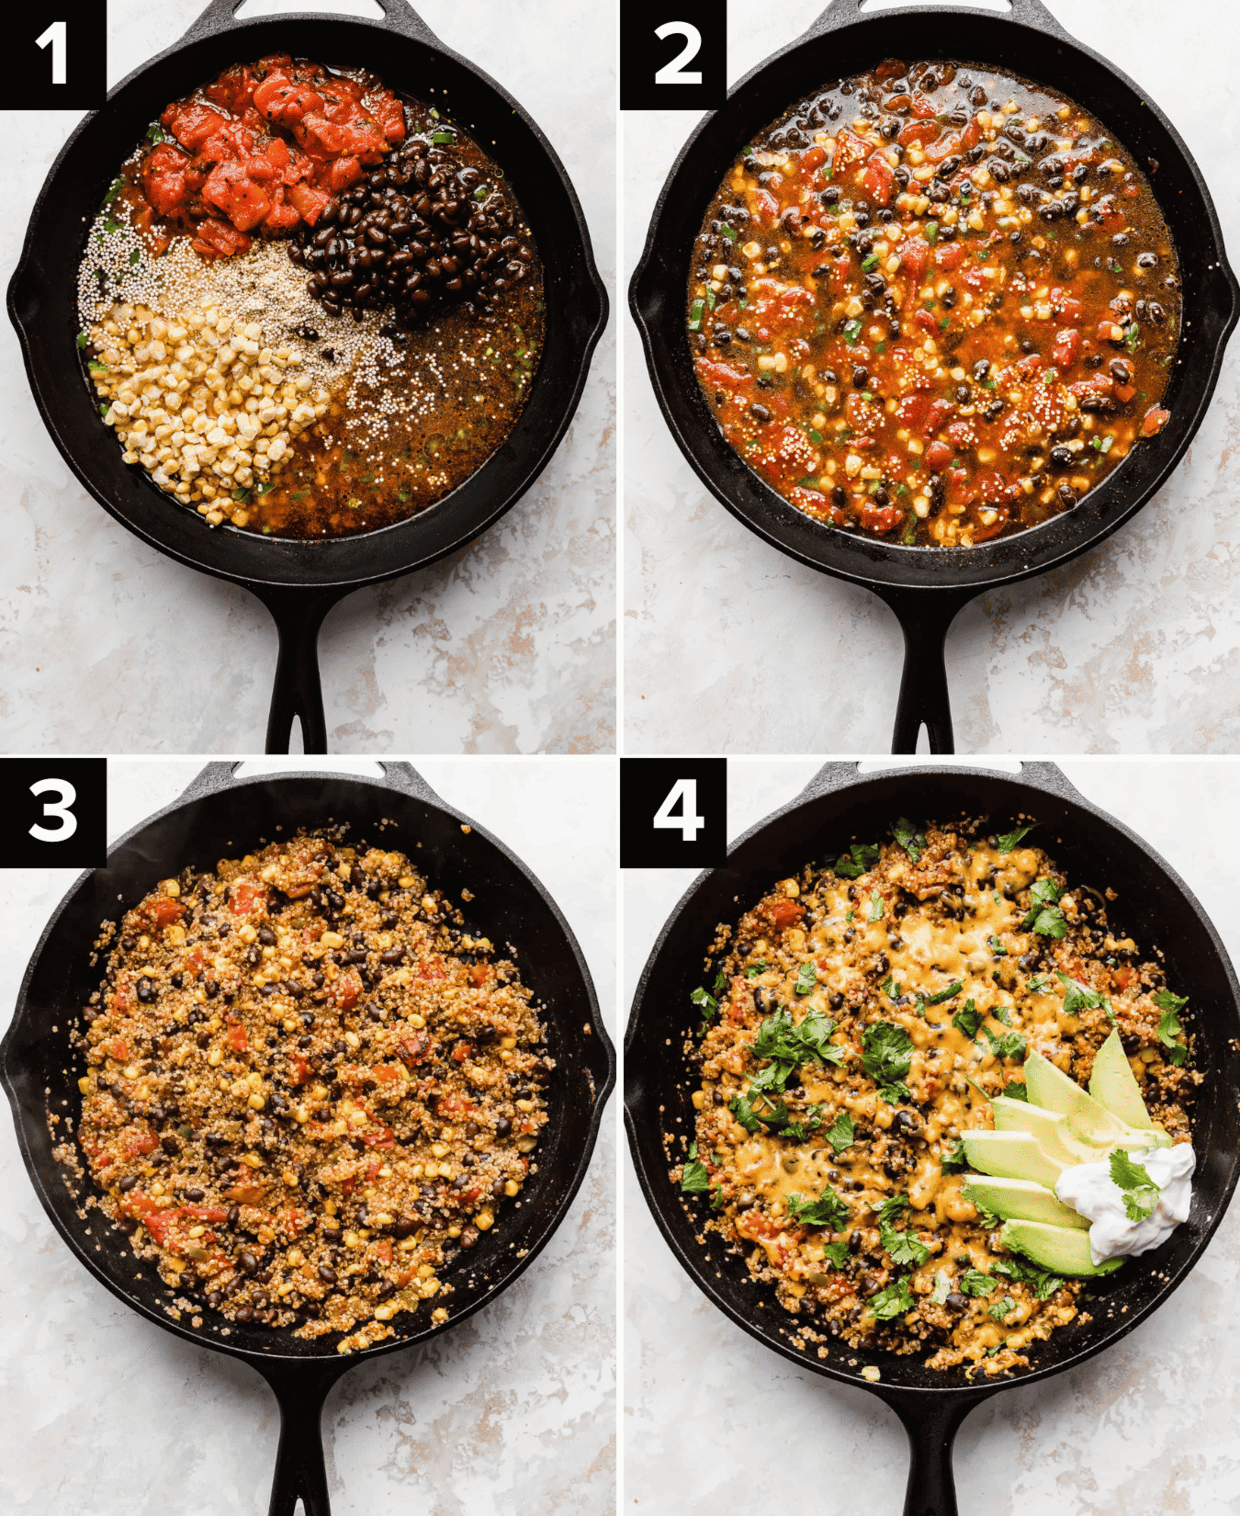 Four images showing how to make a skillet Mexican Quinoa recipe.